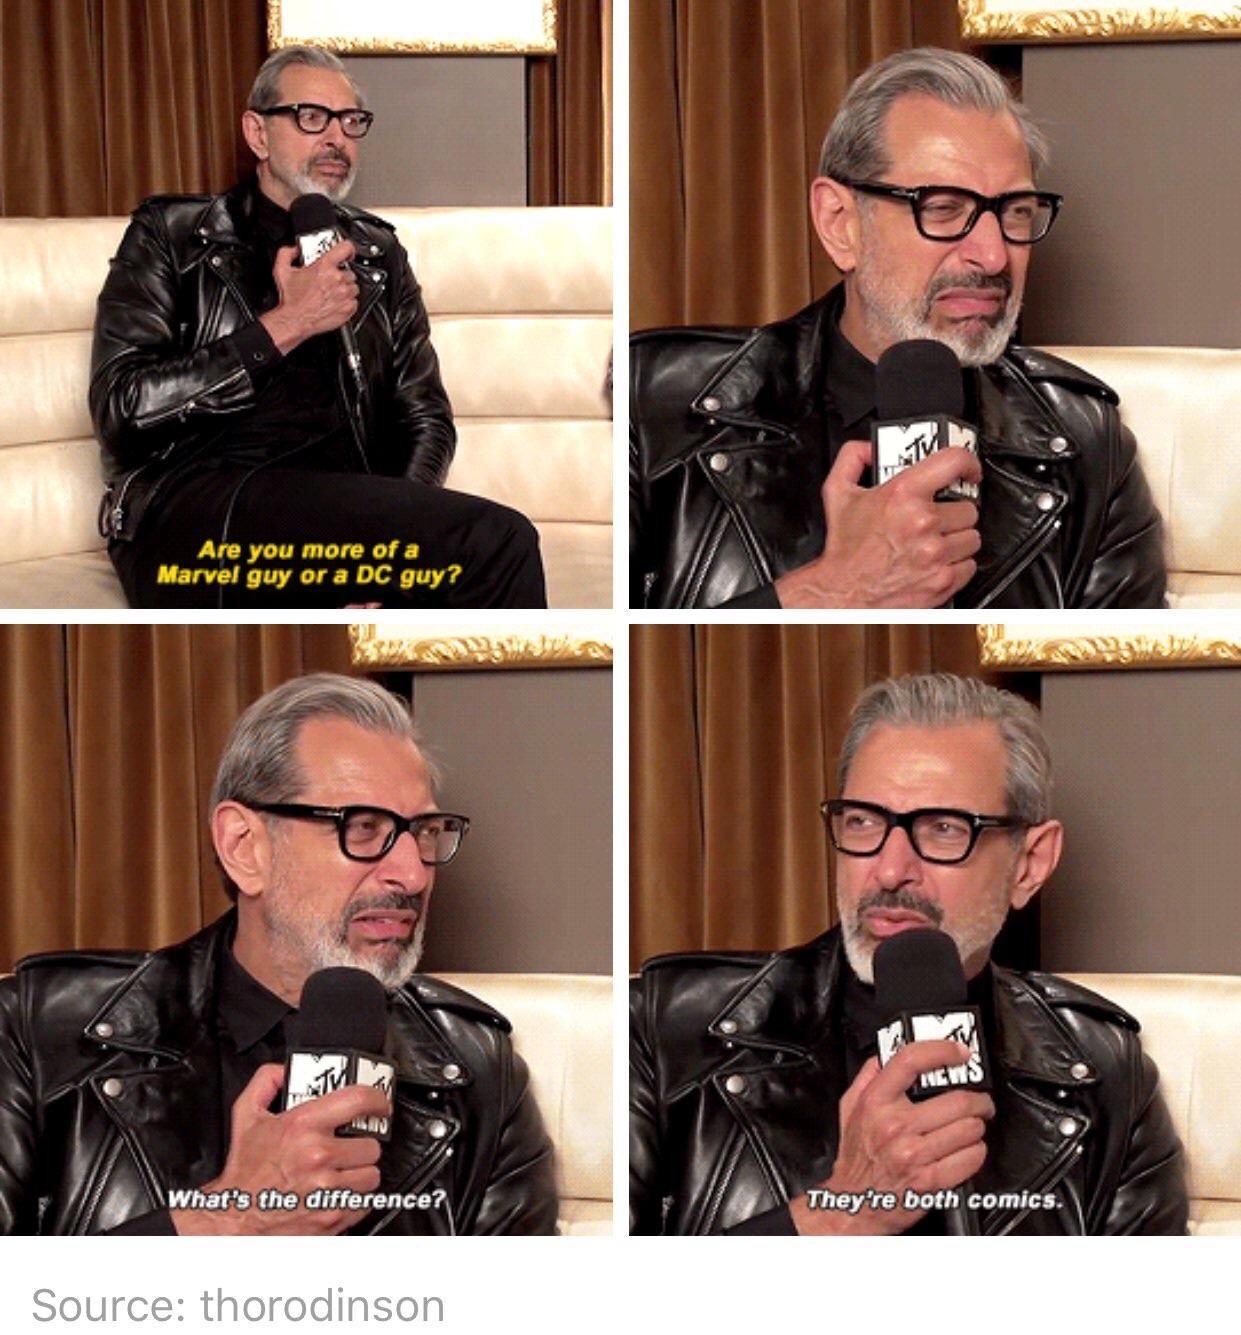 Thor: Ragnarok's Jeff Goldblum's reaction when asked if he prefers Marvel or DC